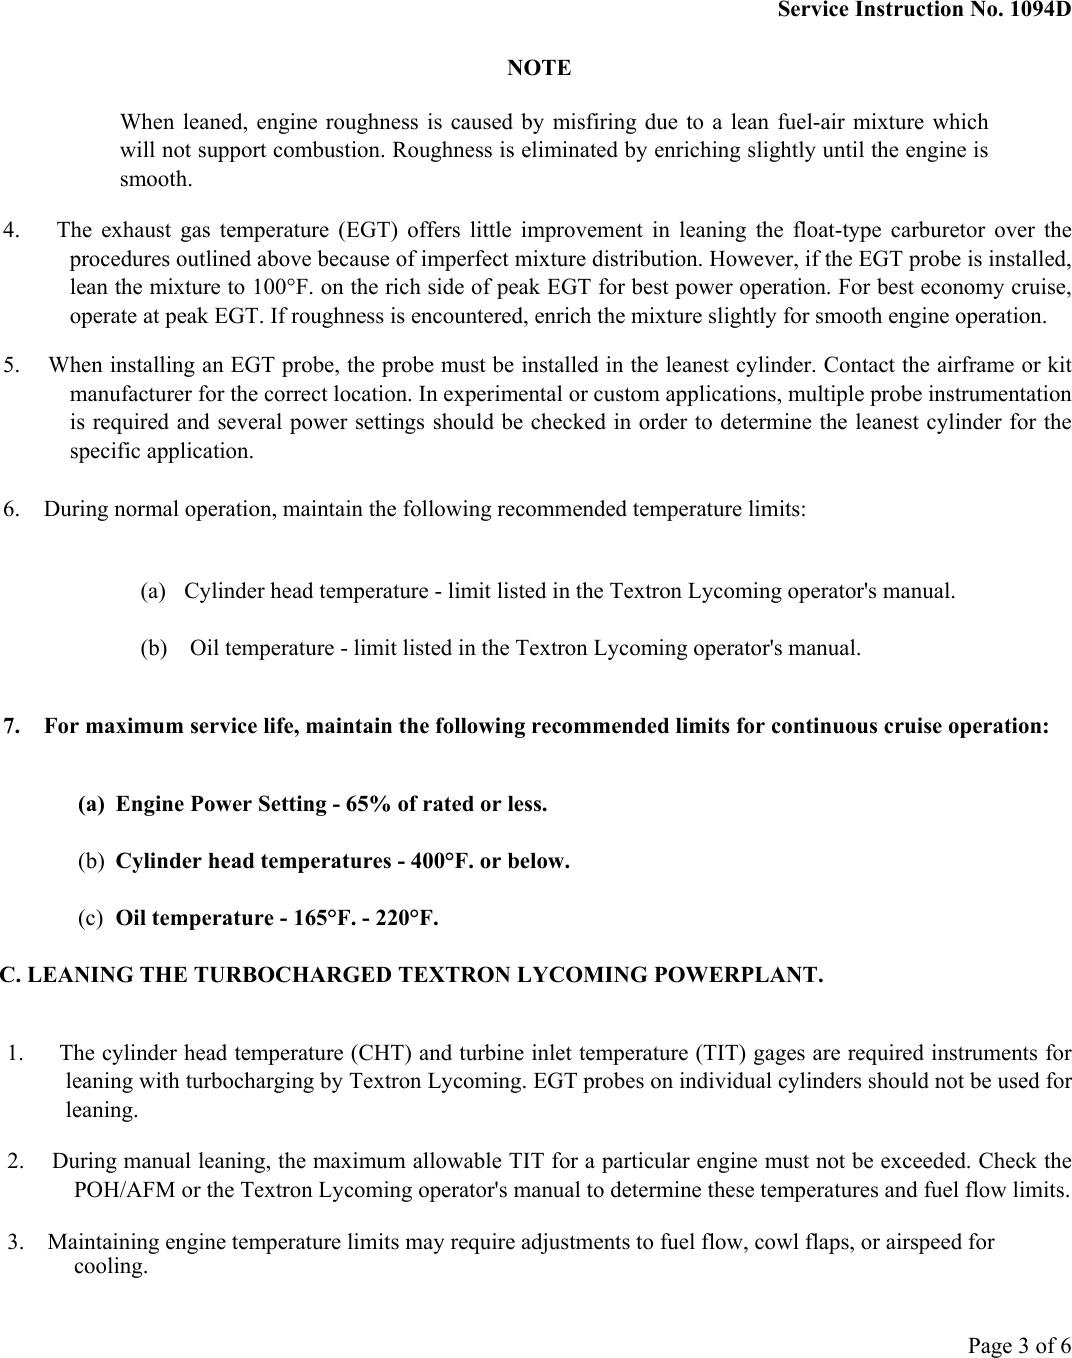 Page 3 of 6 - Lycoming Service Bulletin On Leaning Procedures SI1094D